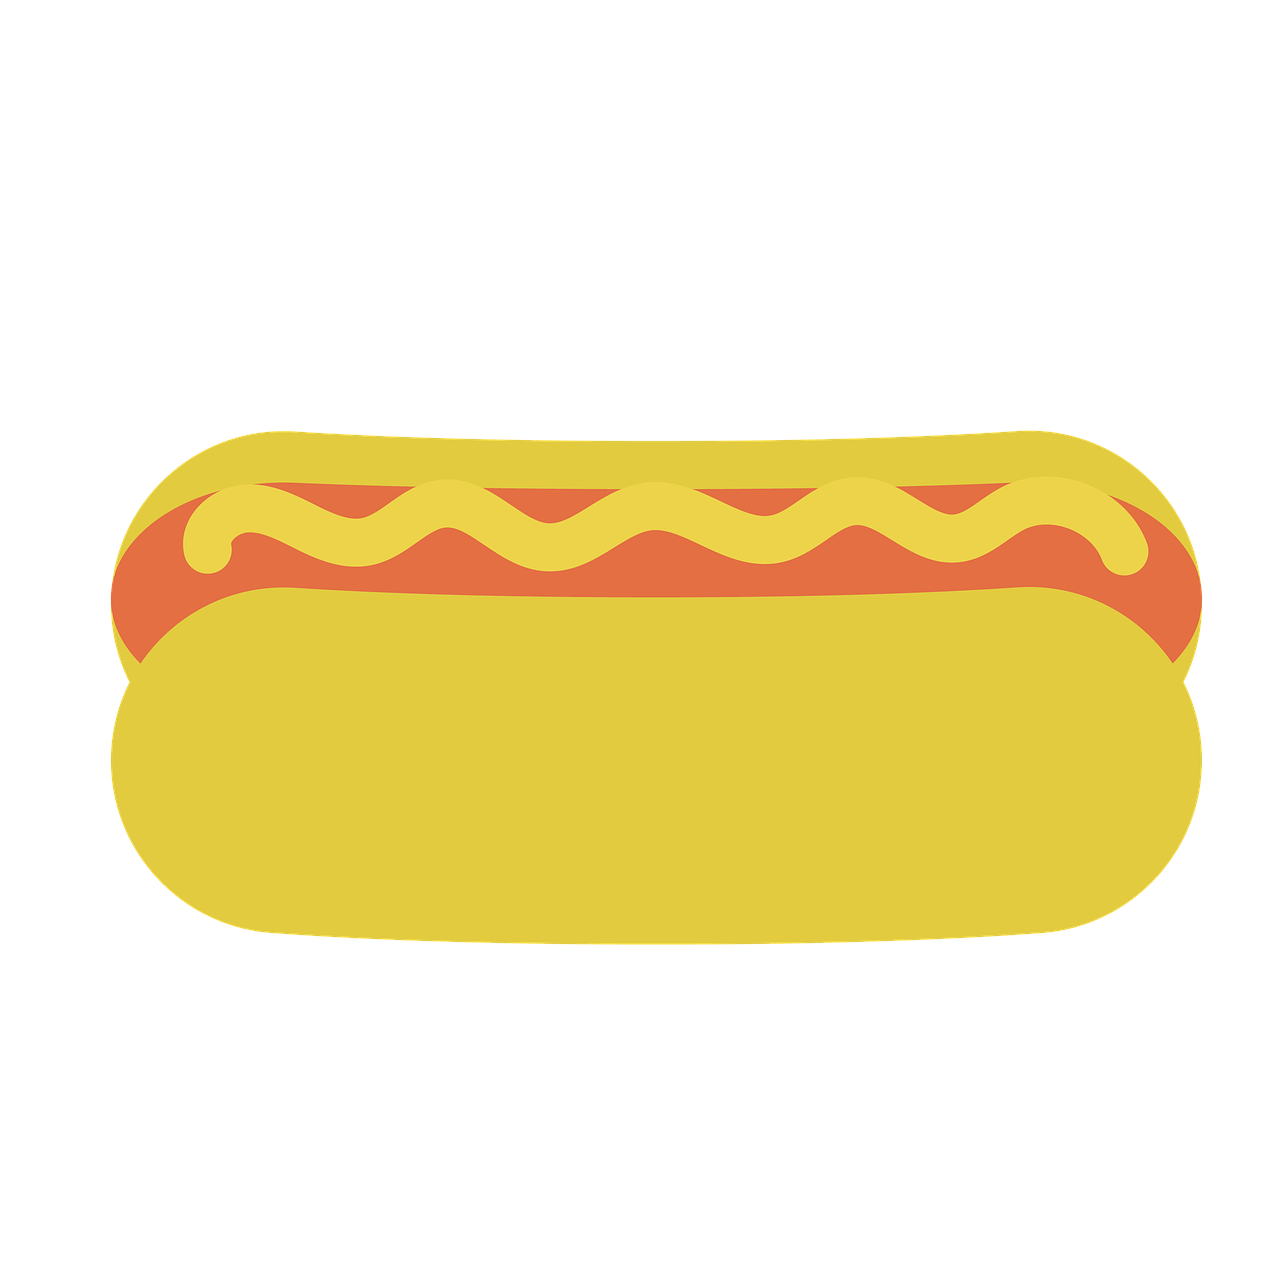 Baked Hot Dogs